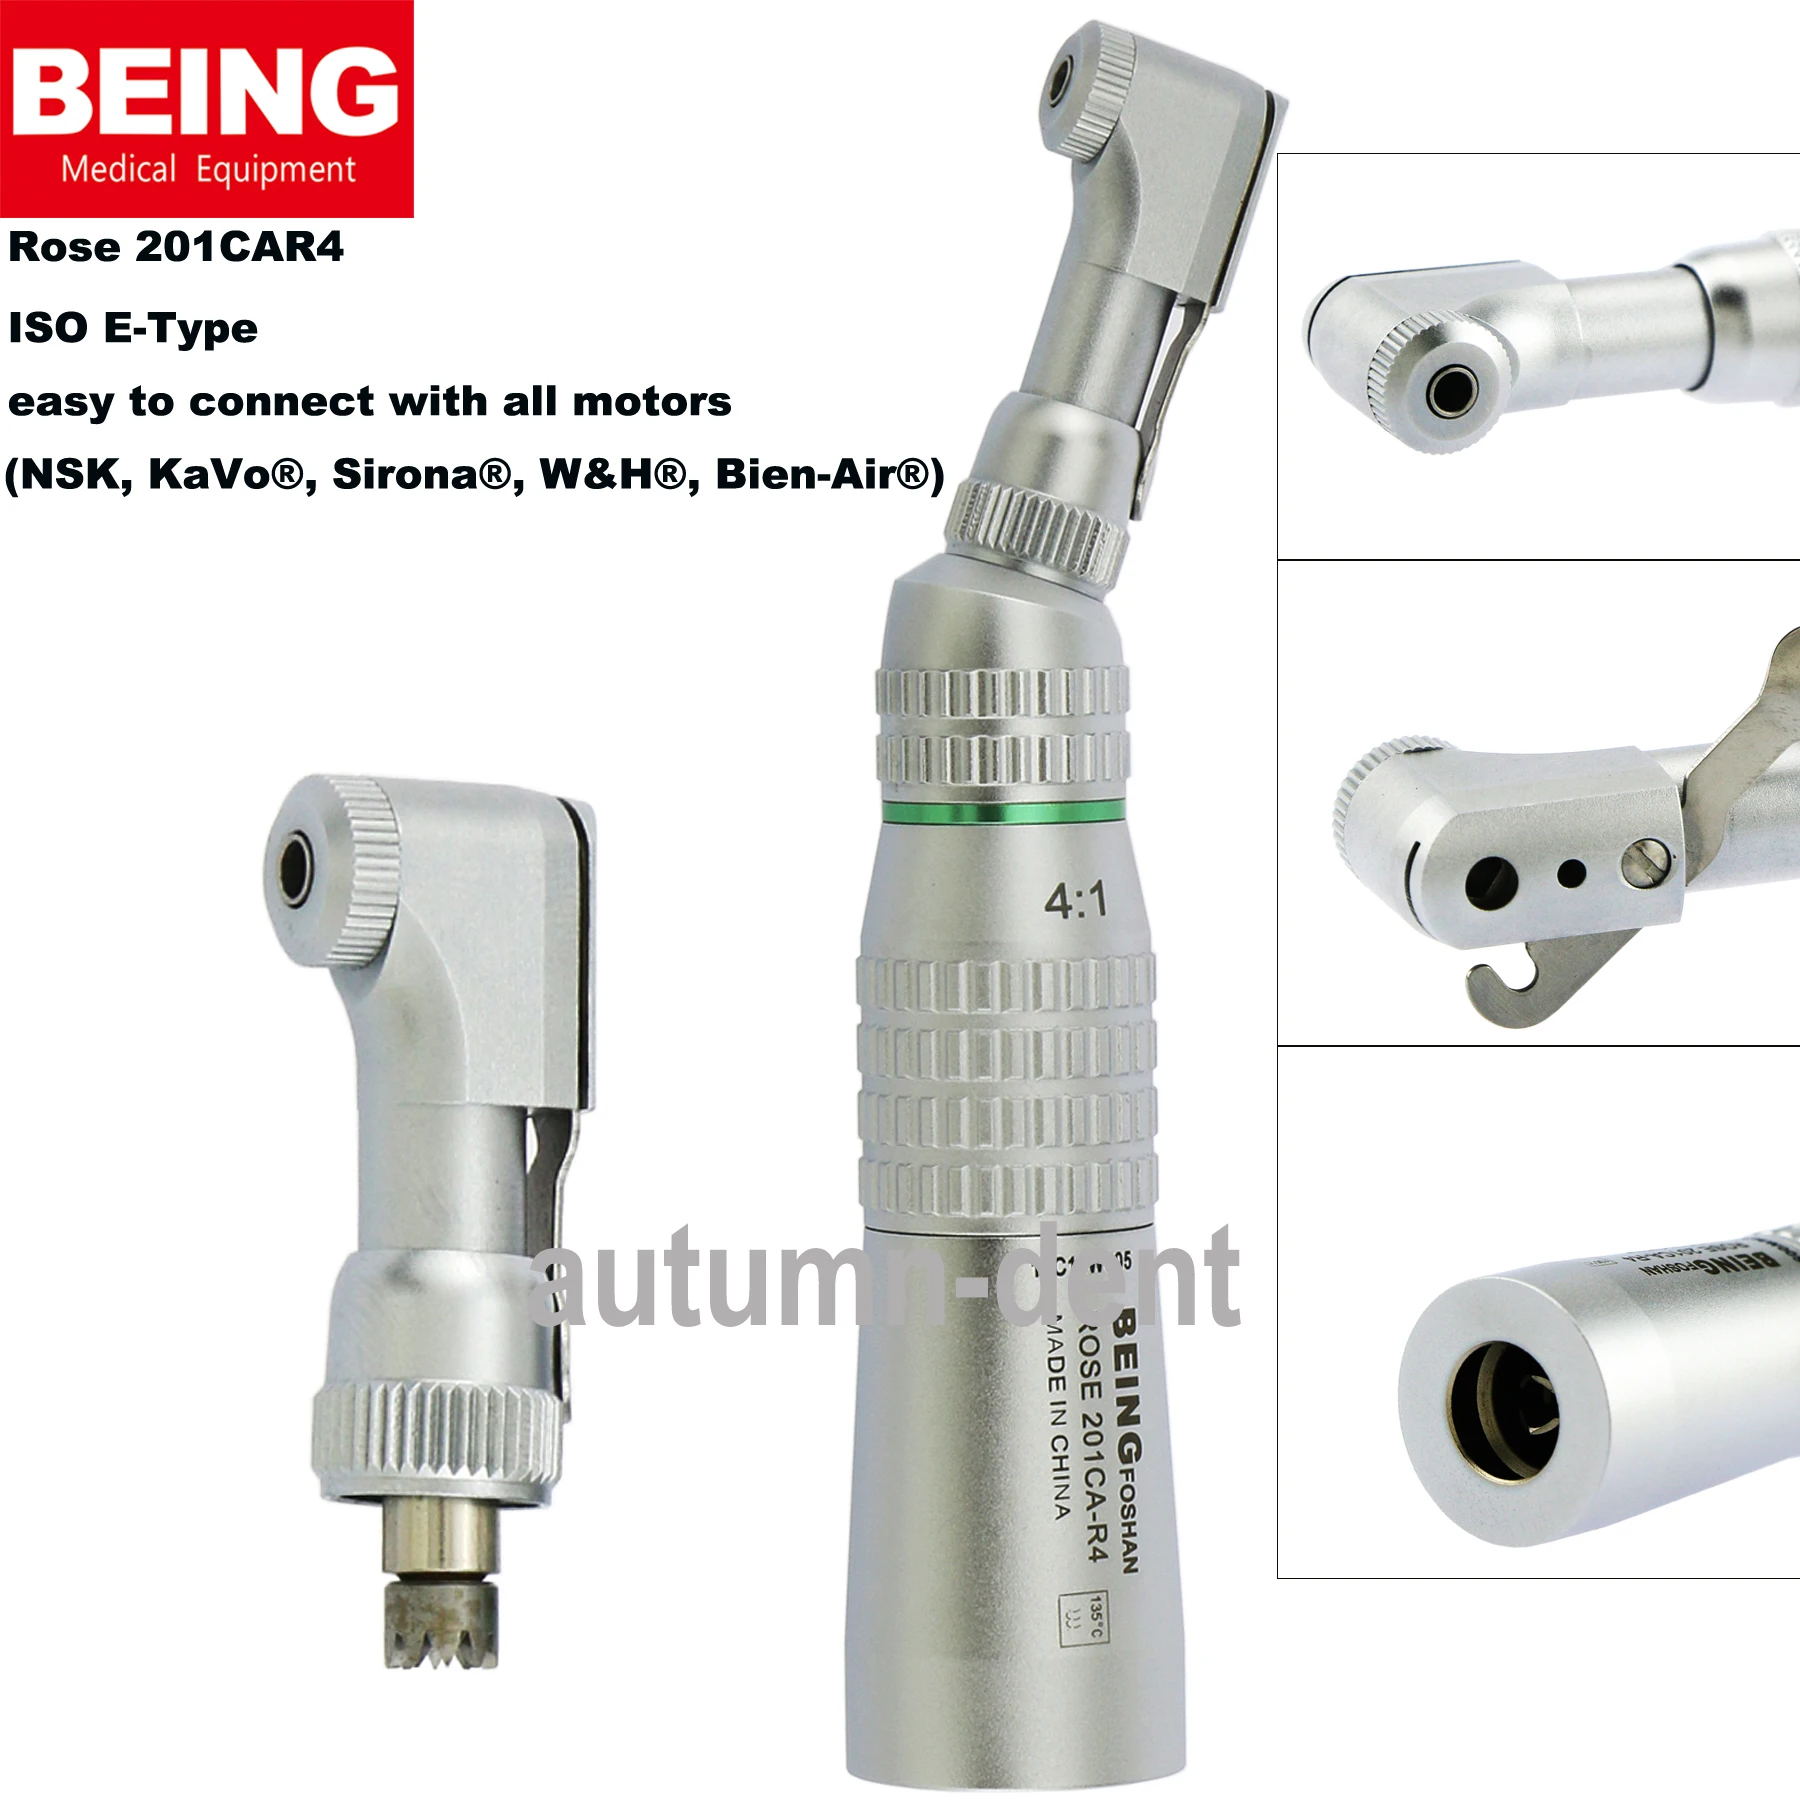 BEING Dental 4:1 Reduction Contra Angle Forward Rotation Low Speed Handpiece Fit for NSK Prophy Endodontic KAVO  M201CA-R4